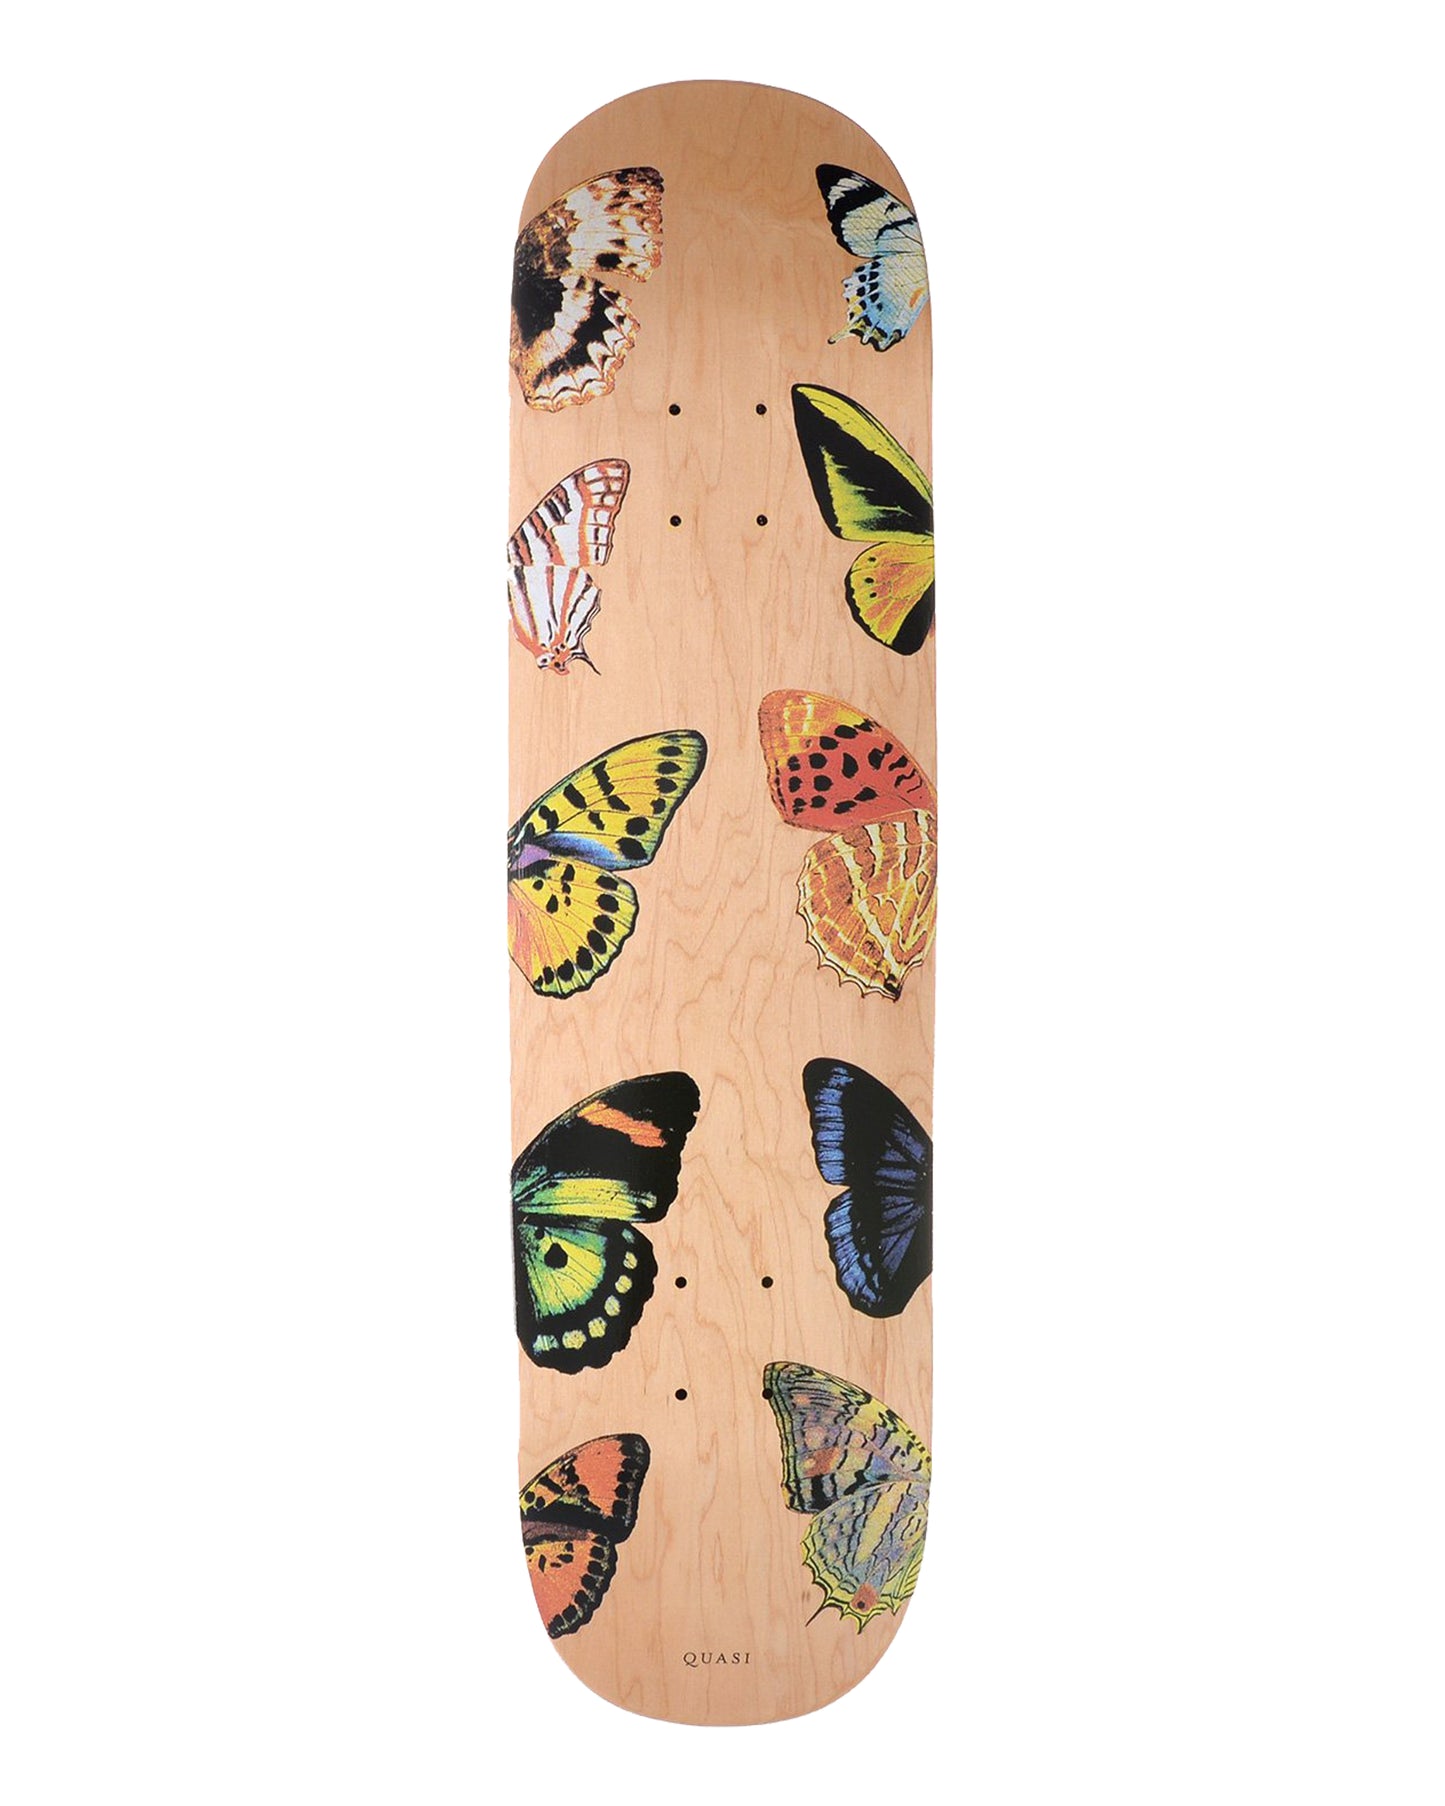 8.25 QUASI BUTTERFLY NATURAL DECK